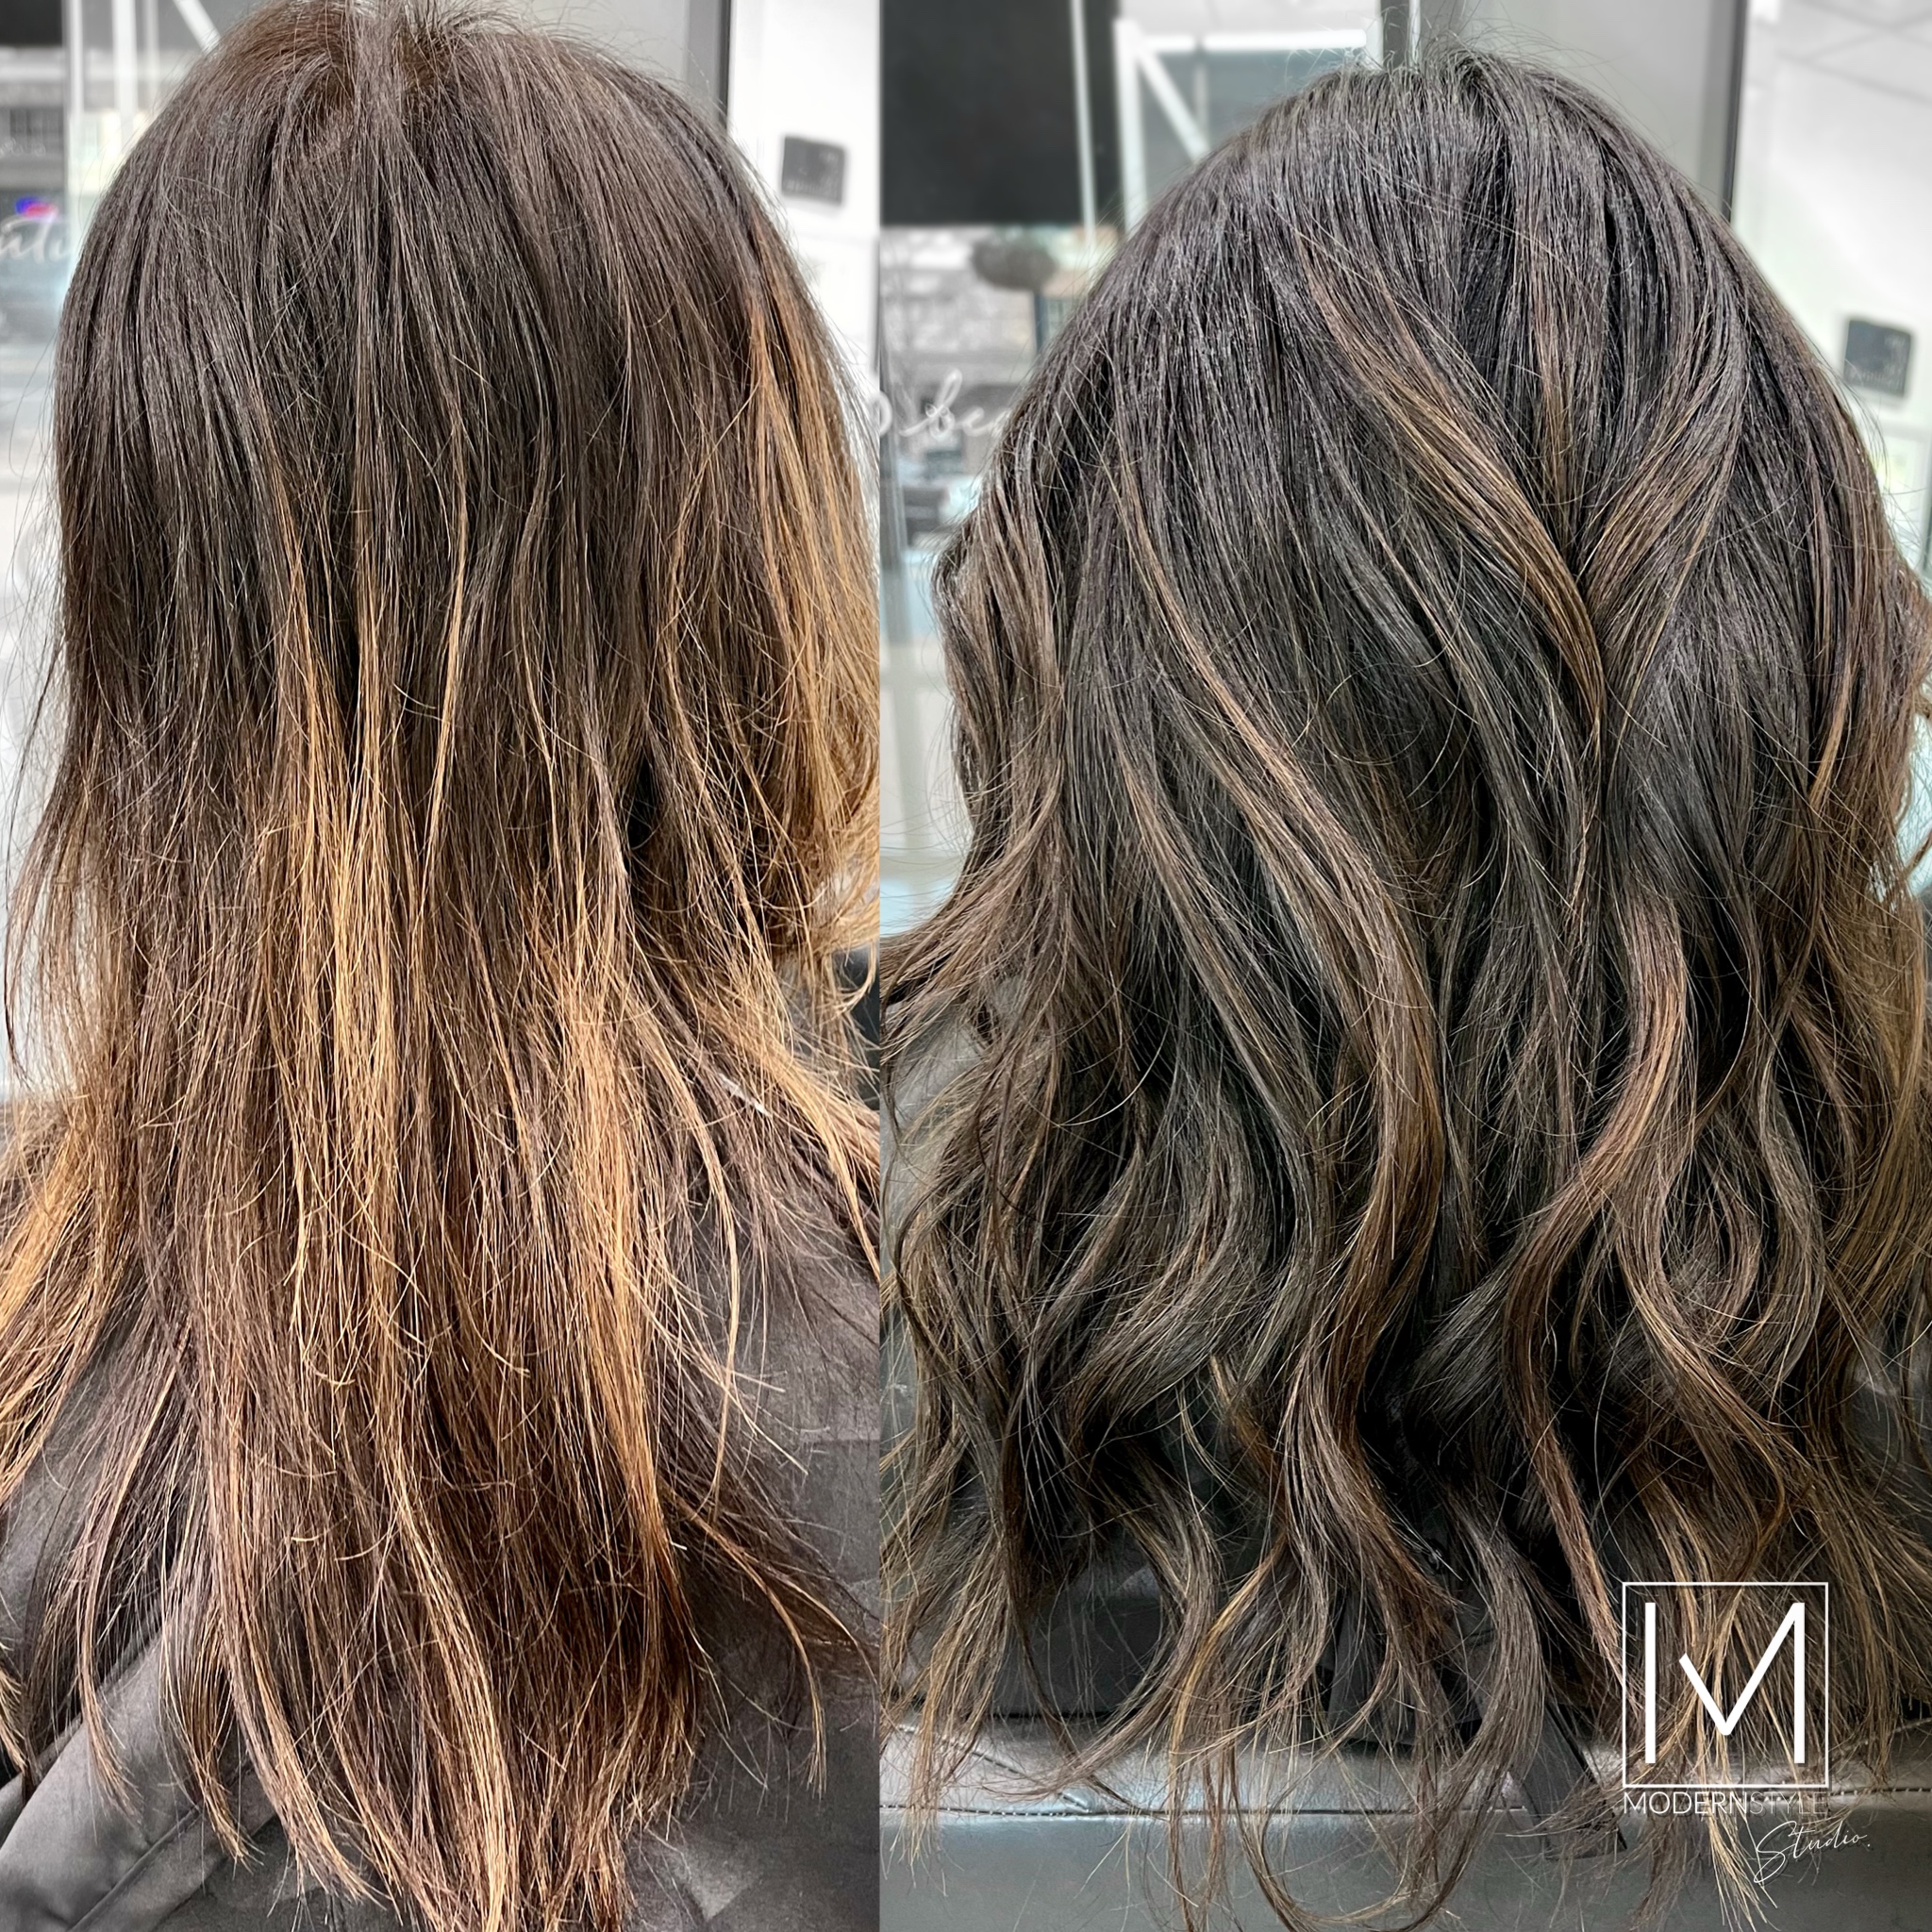 Hand tied extensions near me, hair extensions near me, natural beaded row extensions, keratin tips near me, hair extension specialist near me, hair extensions charlotte